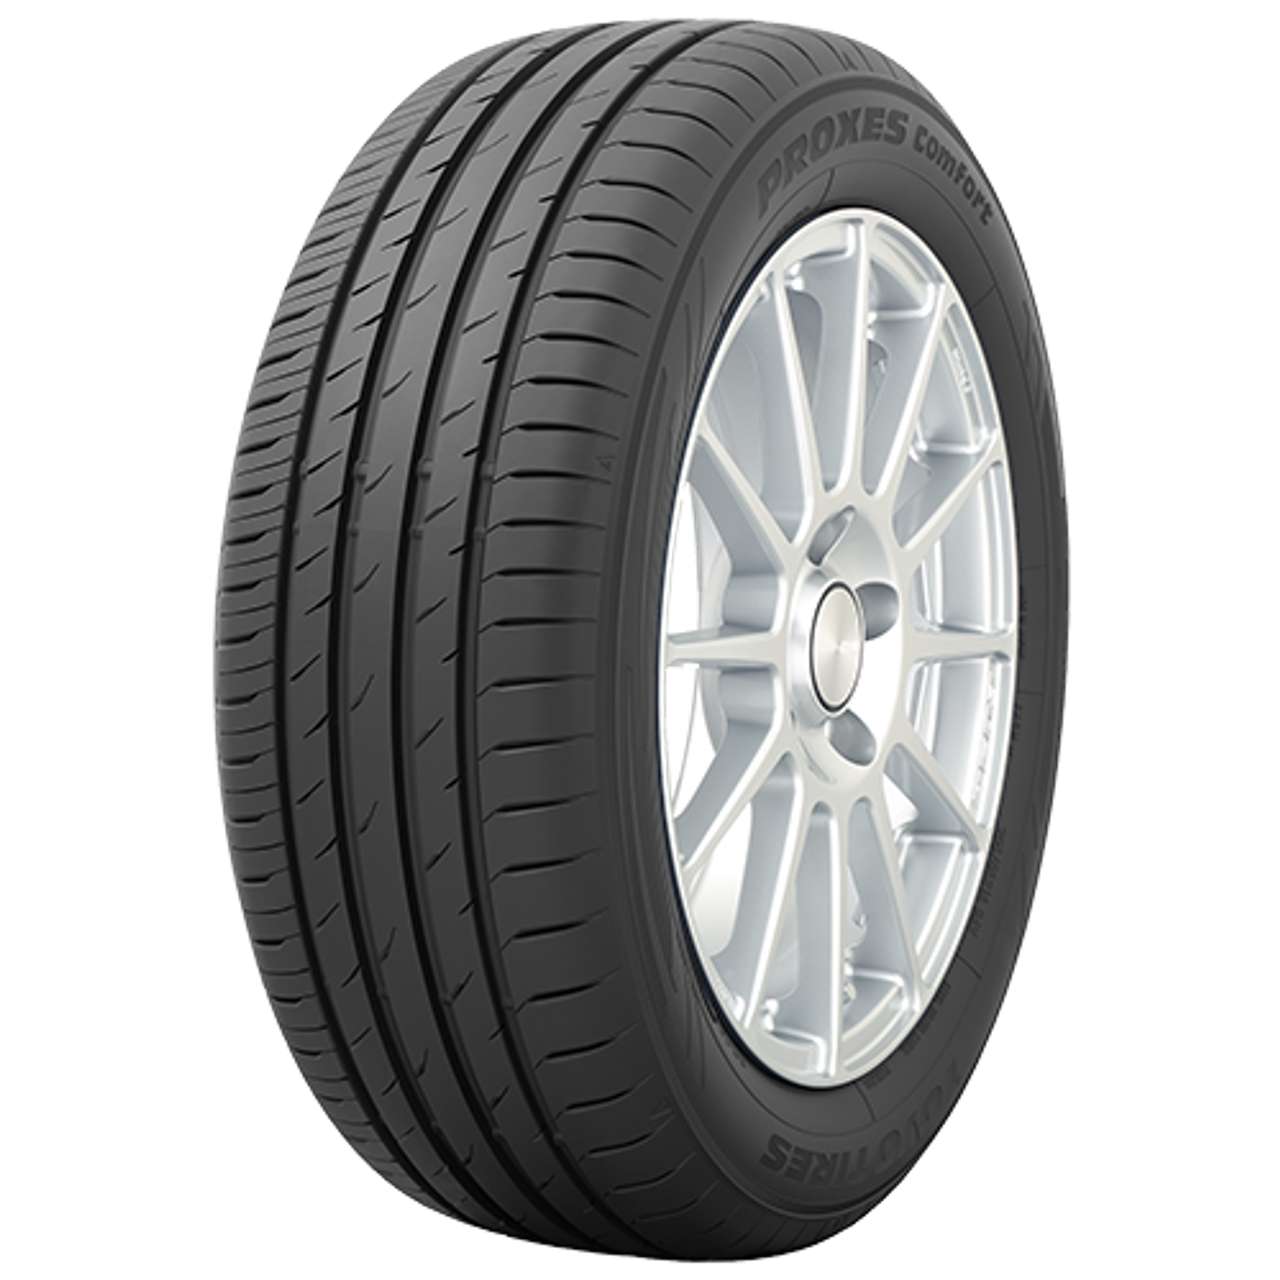 TOYO PROXES COMFORT 195/50R15 82H BSW